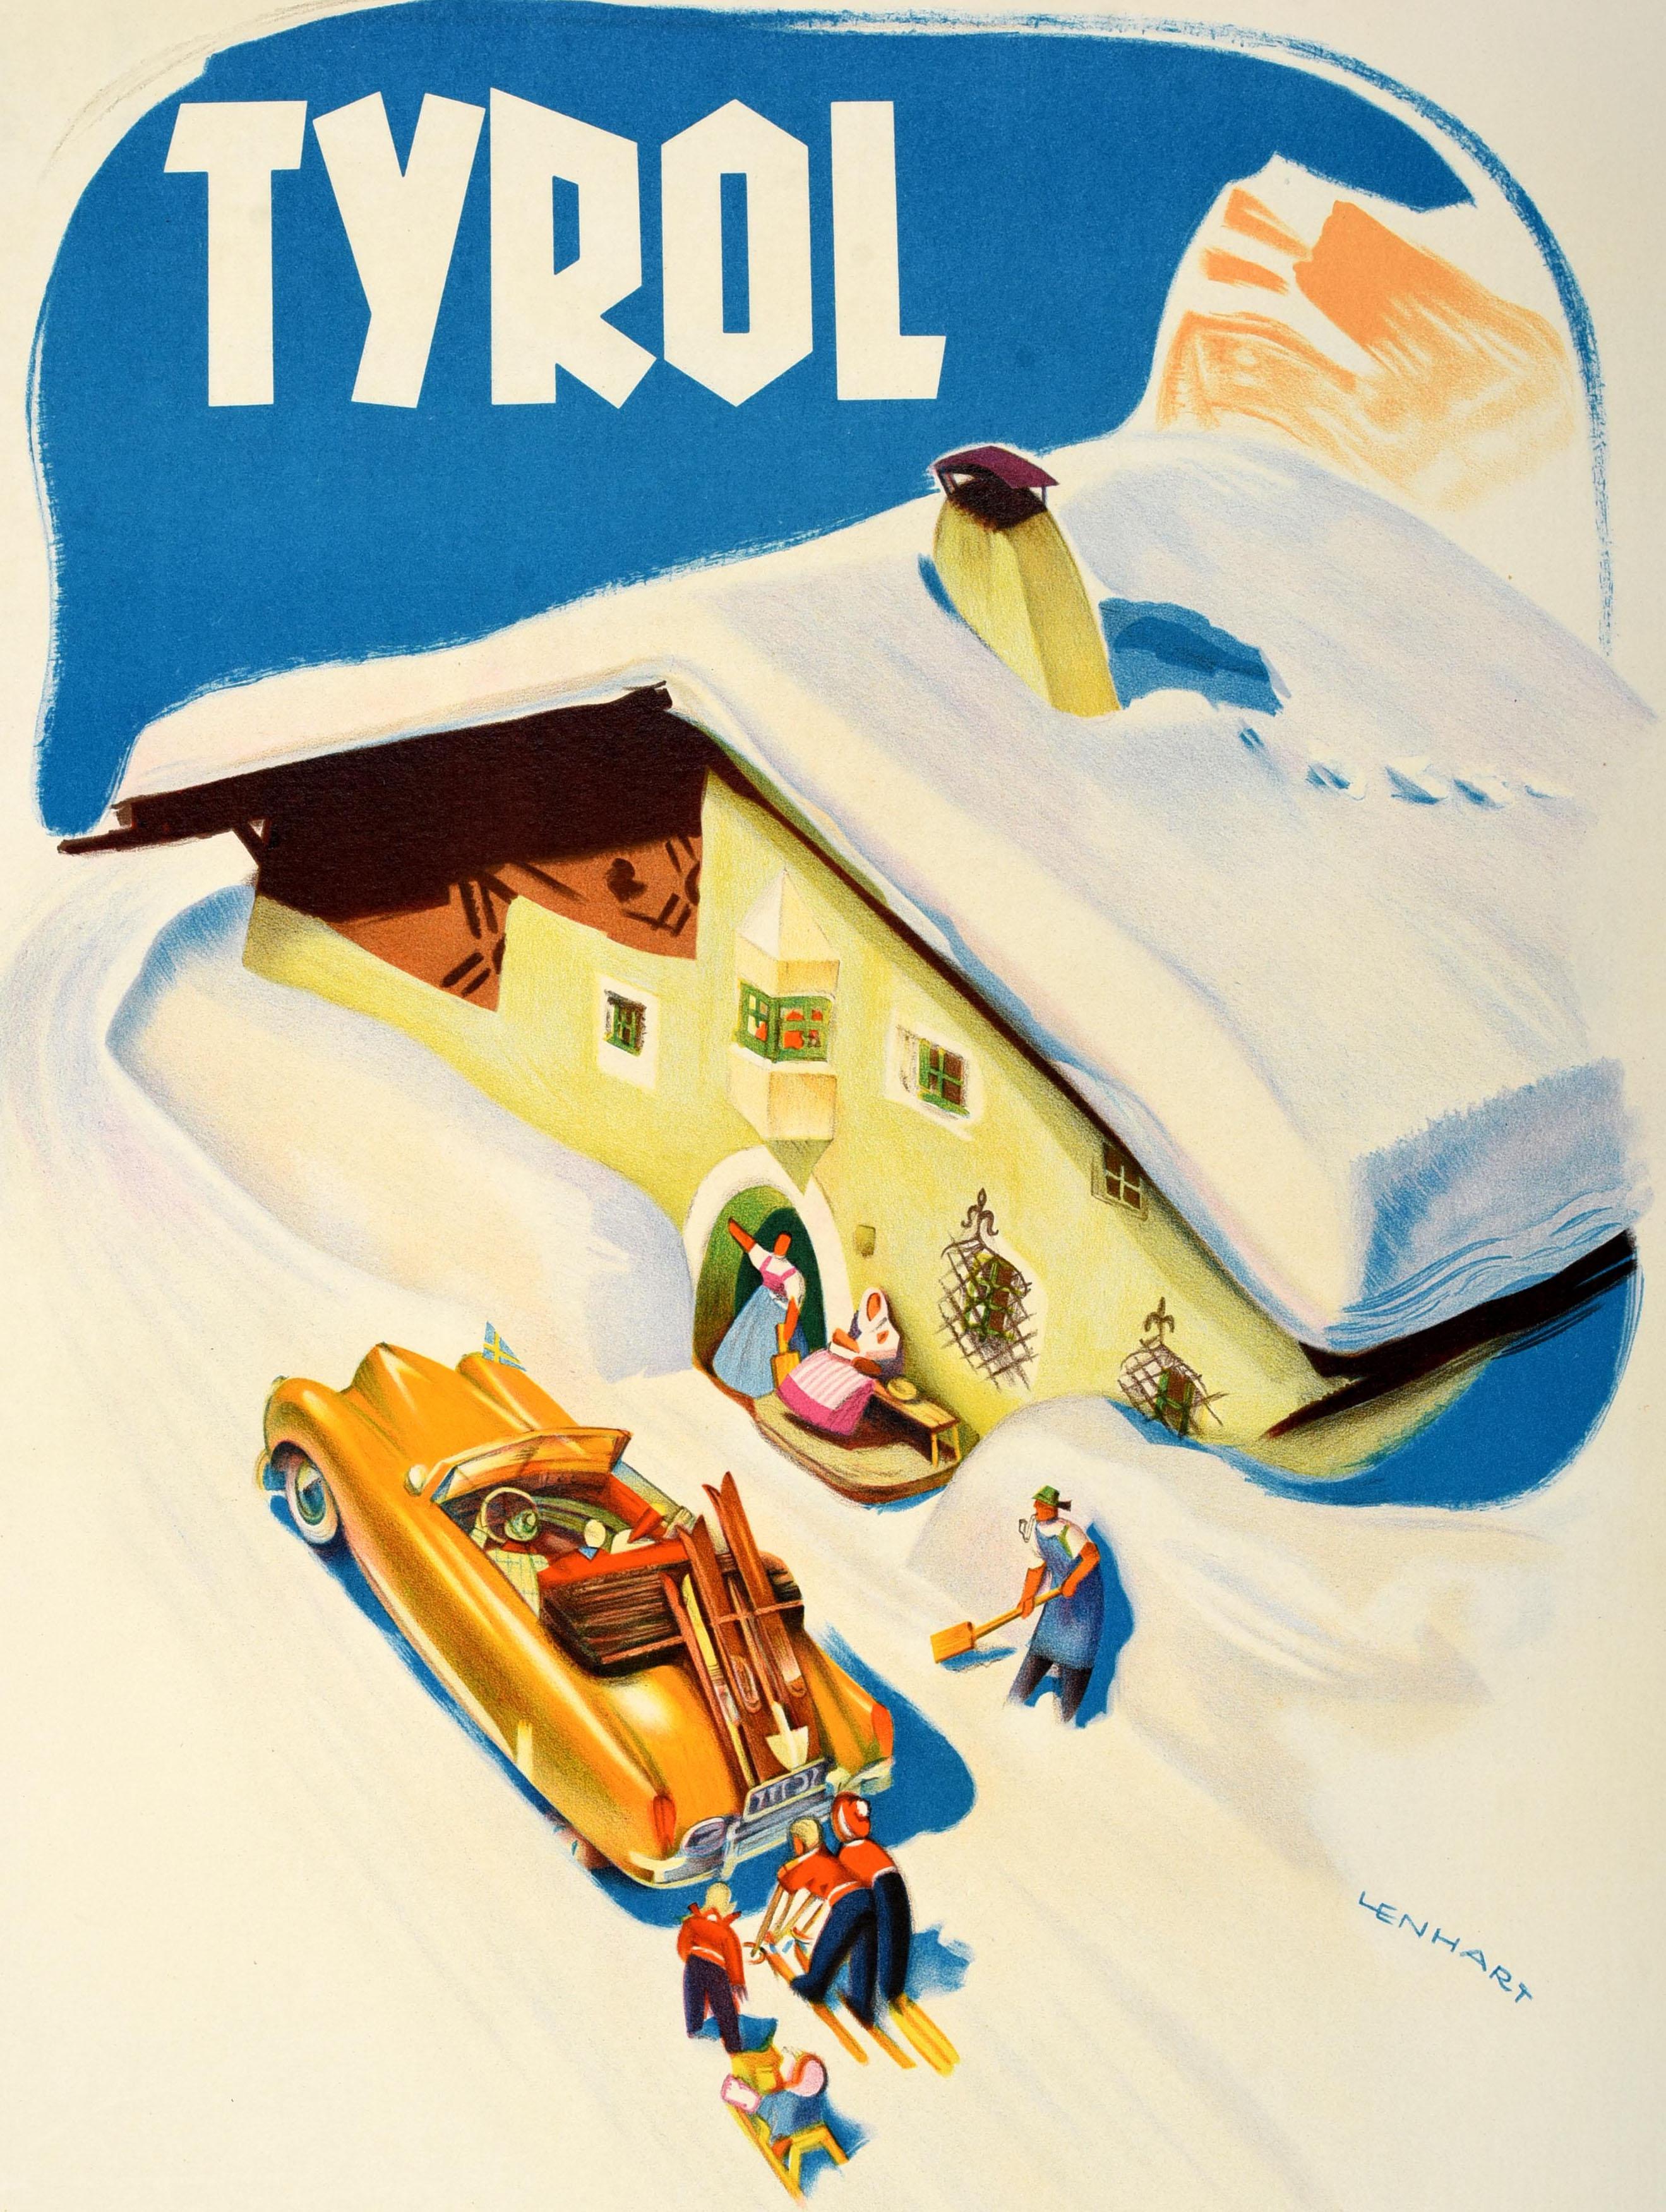 Original vintage winter travel poster for Tyrol featuring fun artwork by Franz Lenhart (1898-1992) depicting a couple in a smart yellow gold coloured car with a Swedish yellow and blue flag on the front of it parked by a snow covered chalet to ask